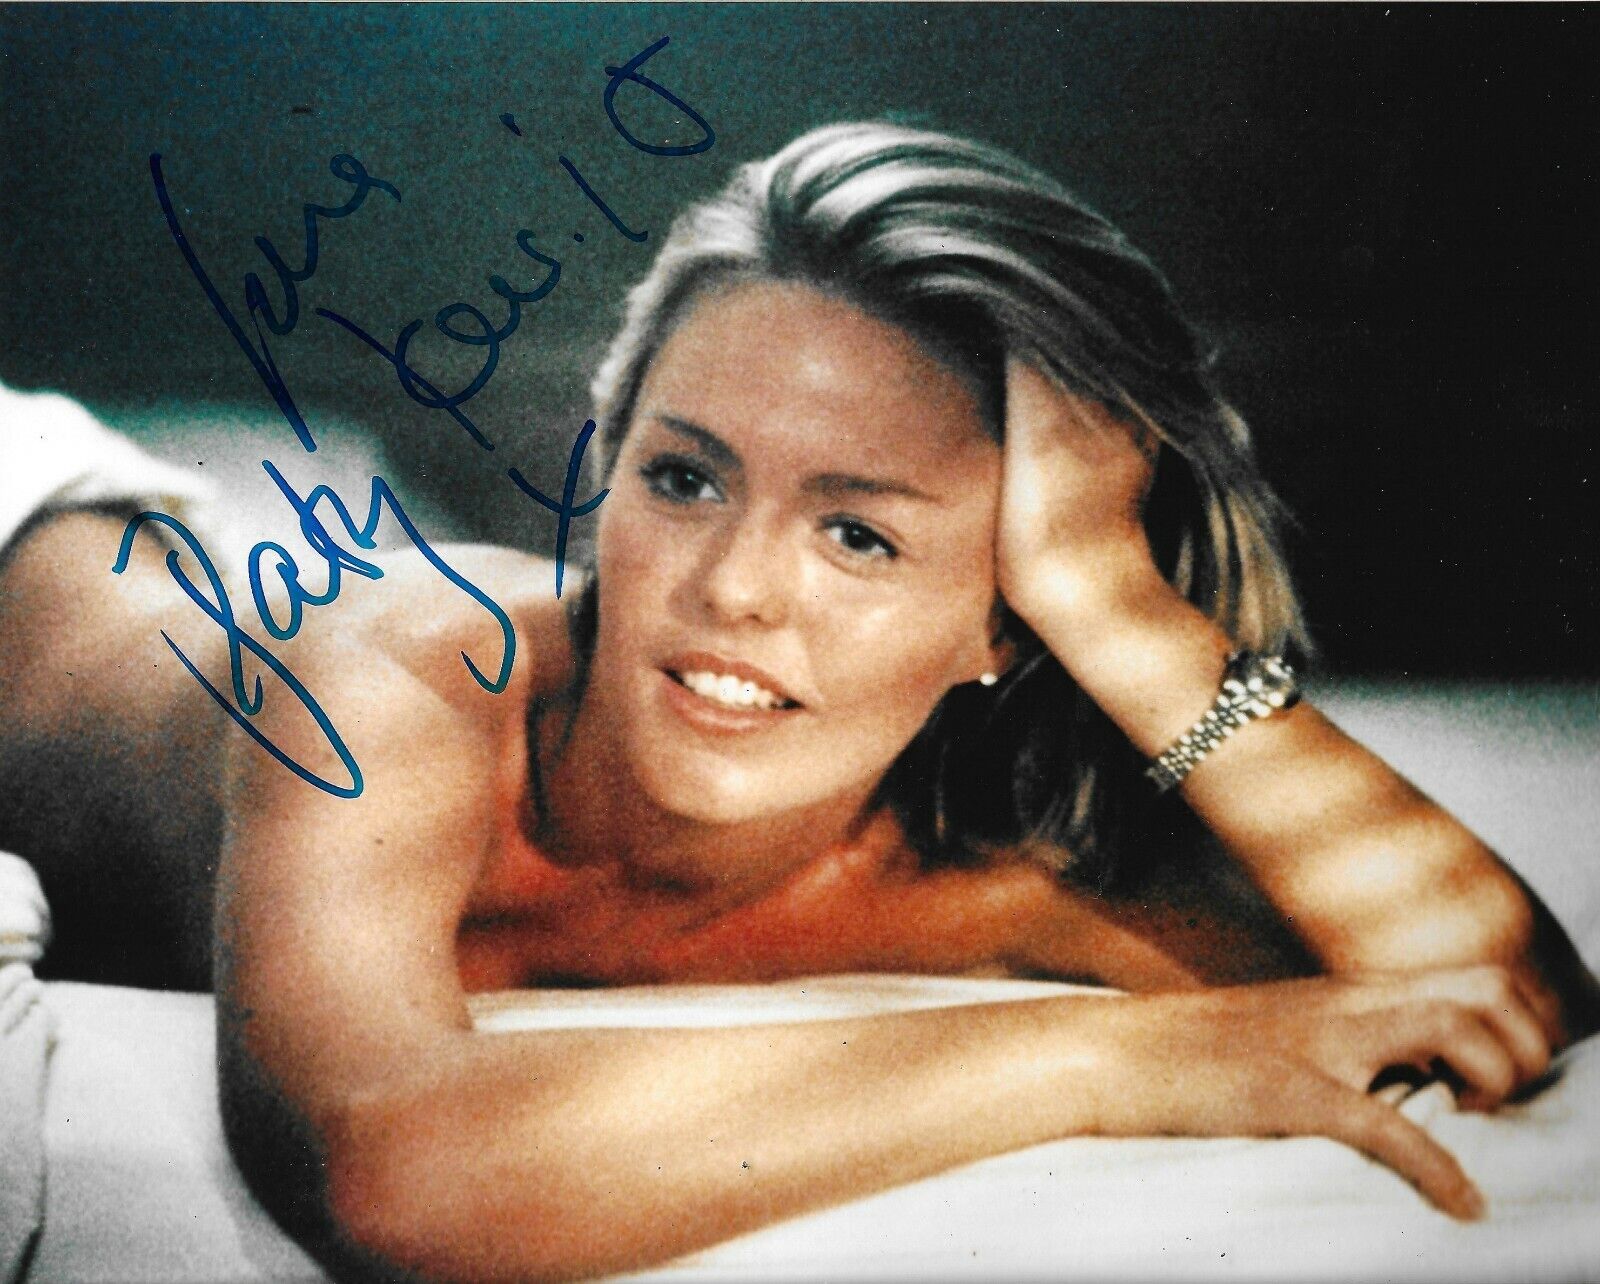 Patsy Kensit Signed Lethal Weapon 2 10x8 Photo Poster painting AFTAL